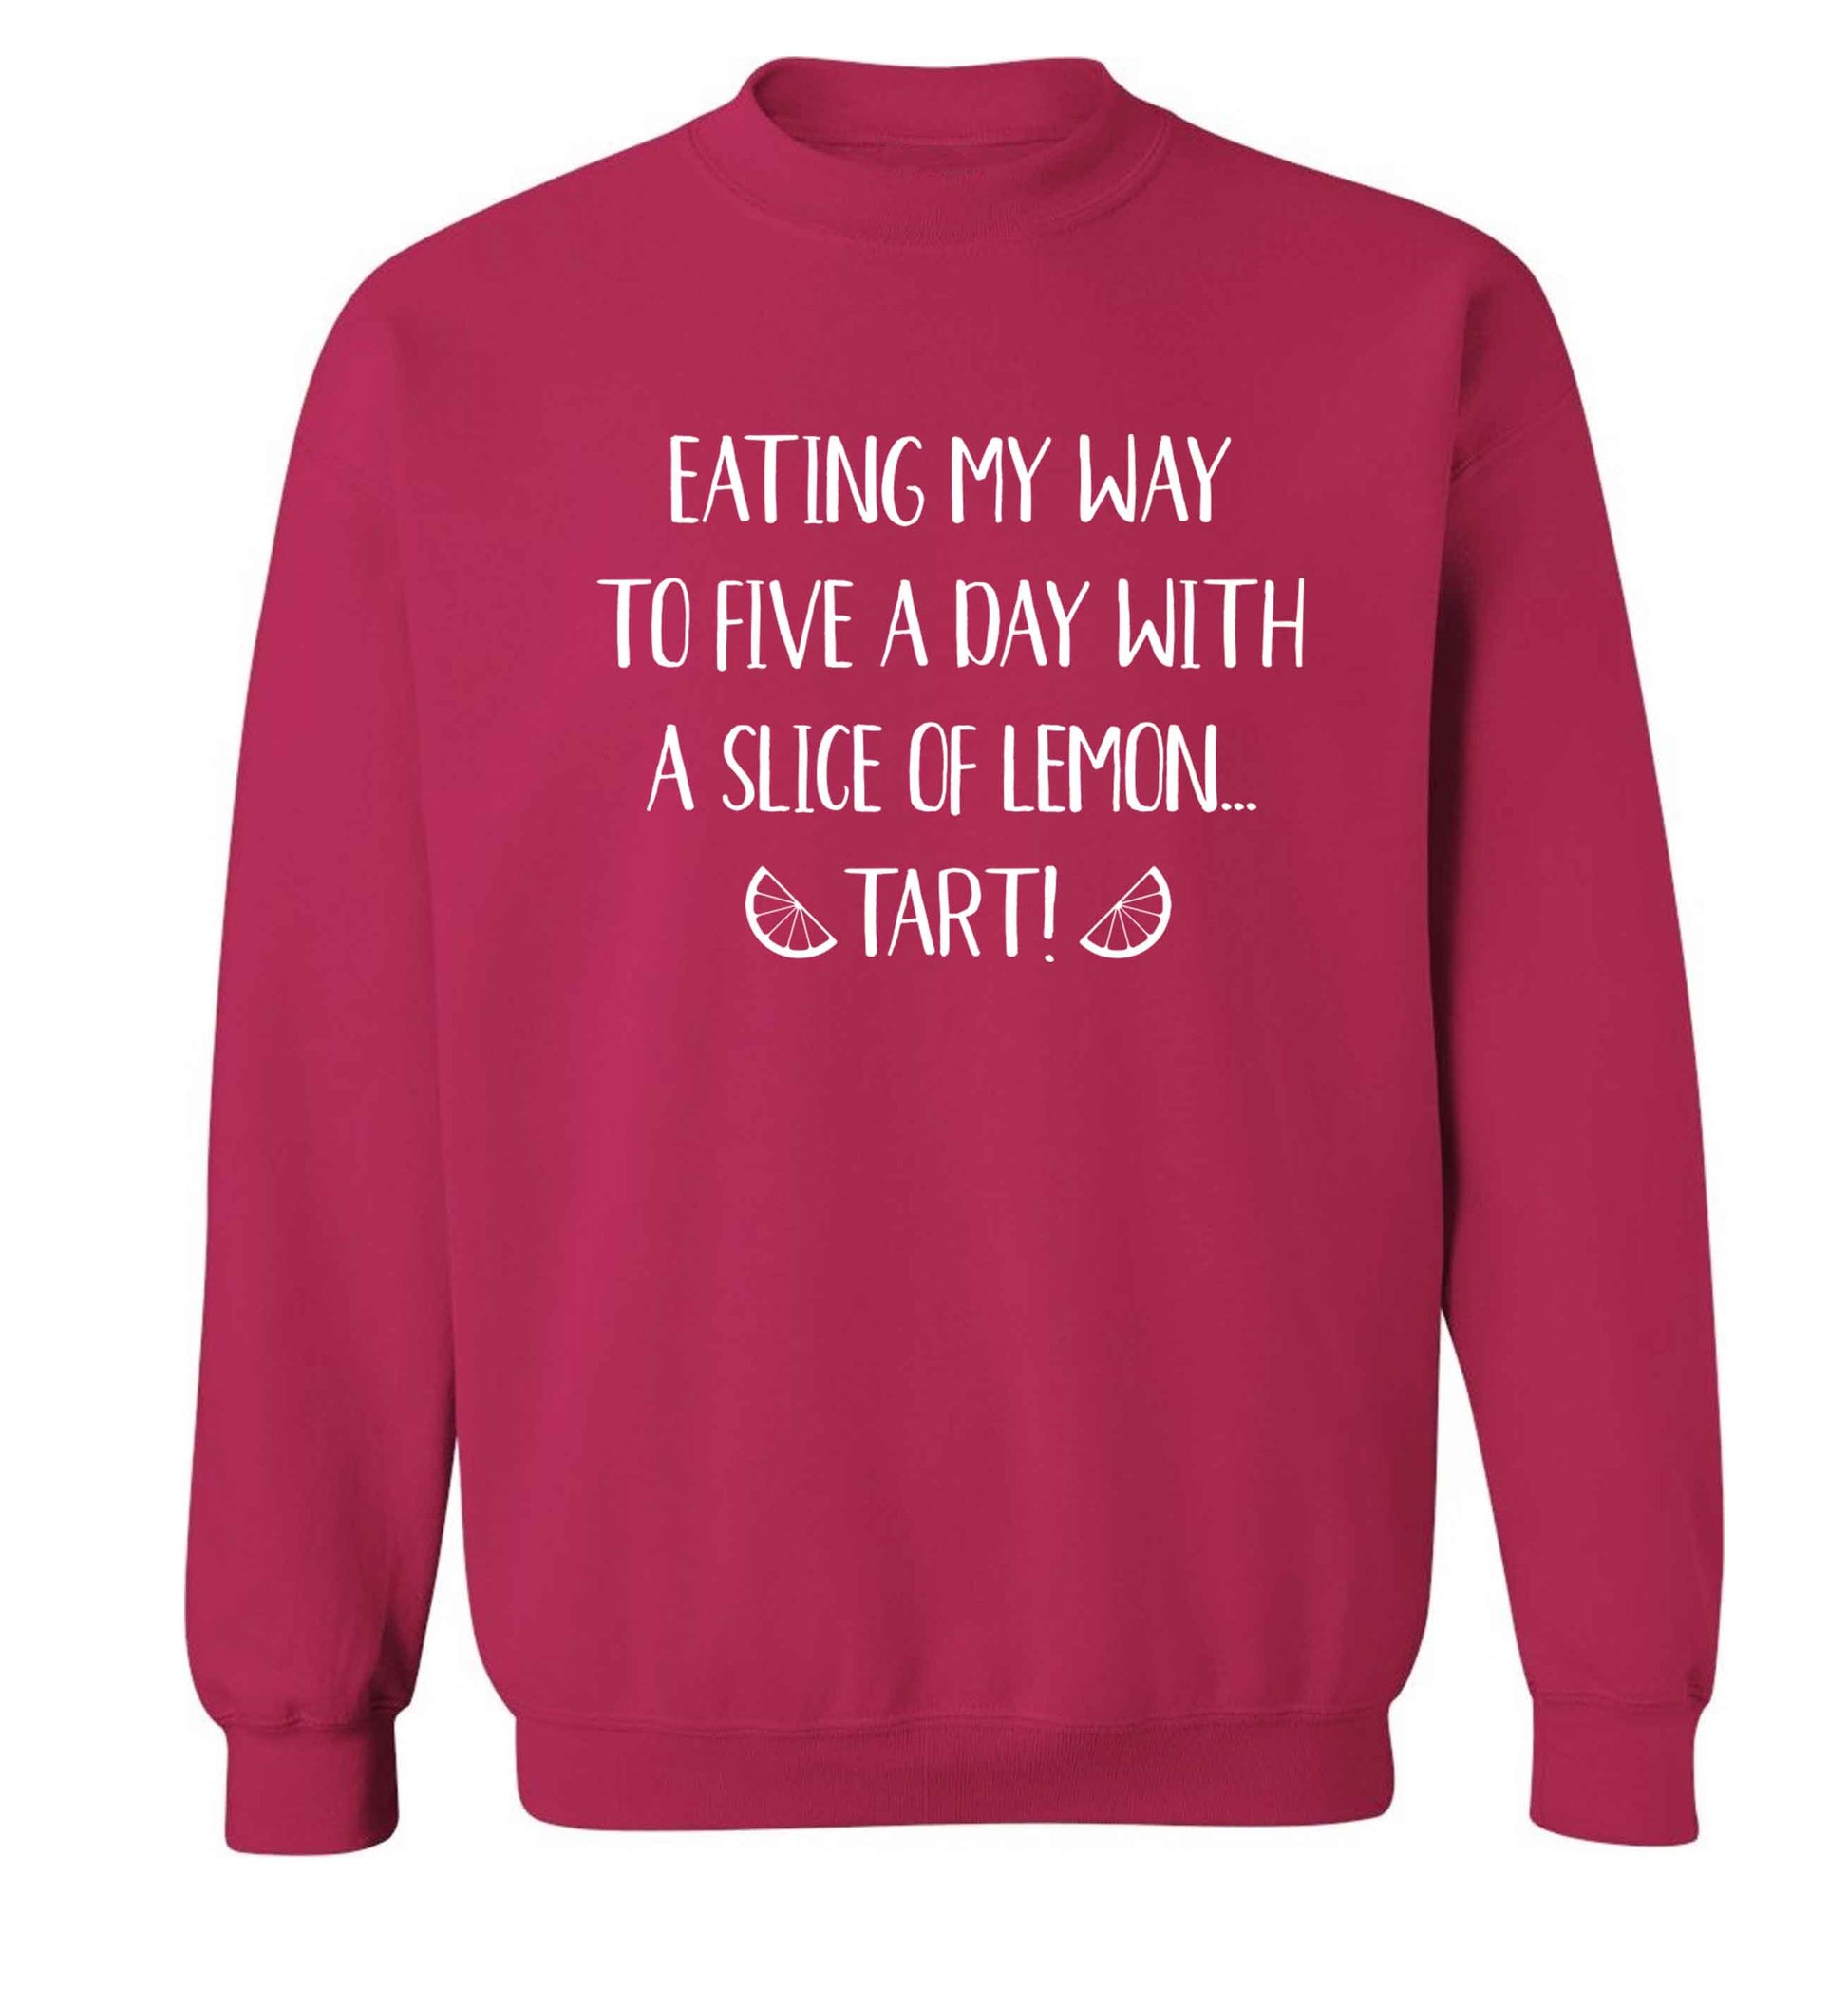 Eating my way to five a day with a slice of lemon tart Adult's unisex pink Sweater 2XL